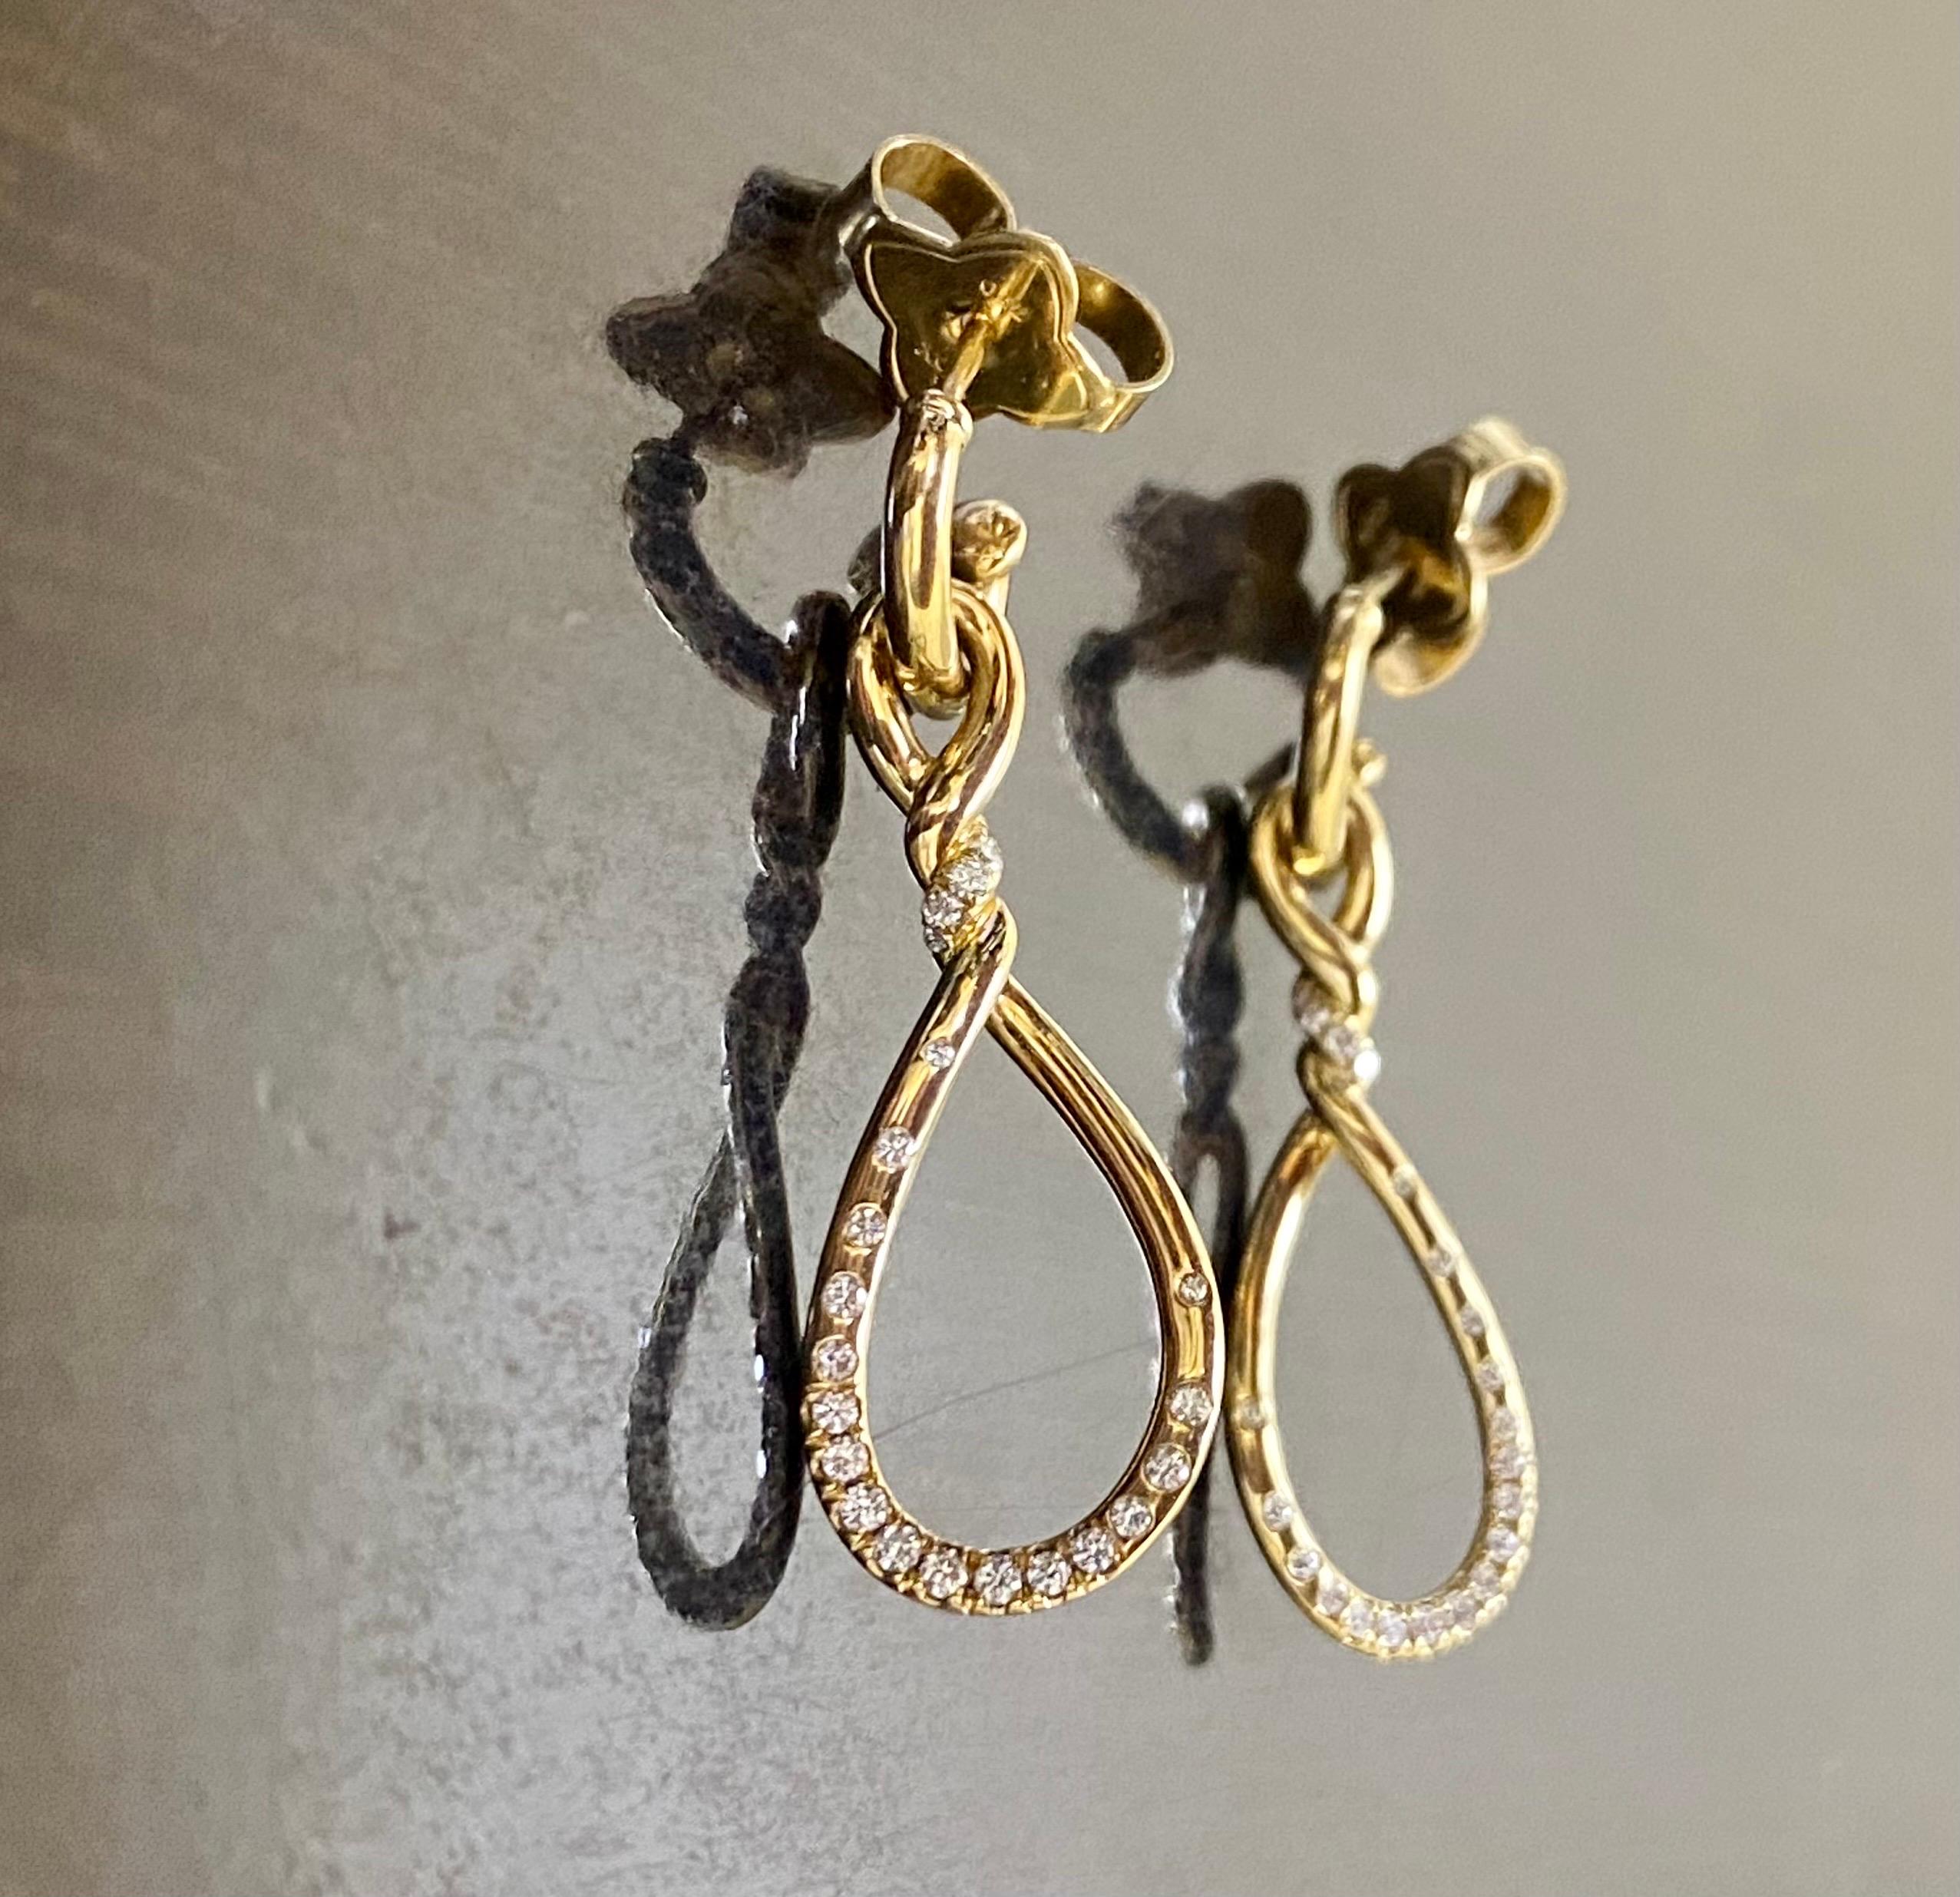 DeKara Design Designer Collection

Metal- 18K Yellow Gold, .750.

Stones- 44 Round Diamonds G Color VS2 Clarity 0.23 Carats.

Authentic David Yurman 18K Yellow Gold Diamond Huggie Twisted Continuance Earrings. These earrings feature pear shaped